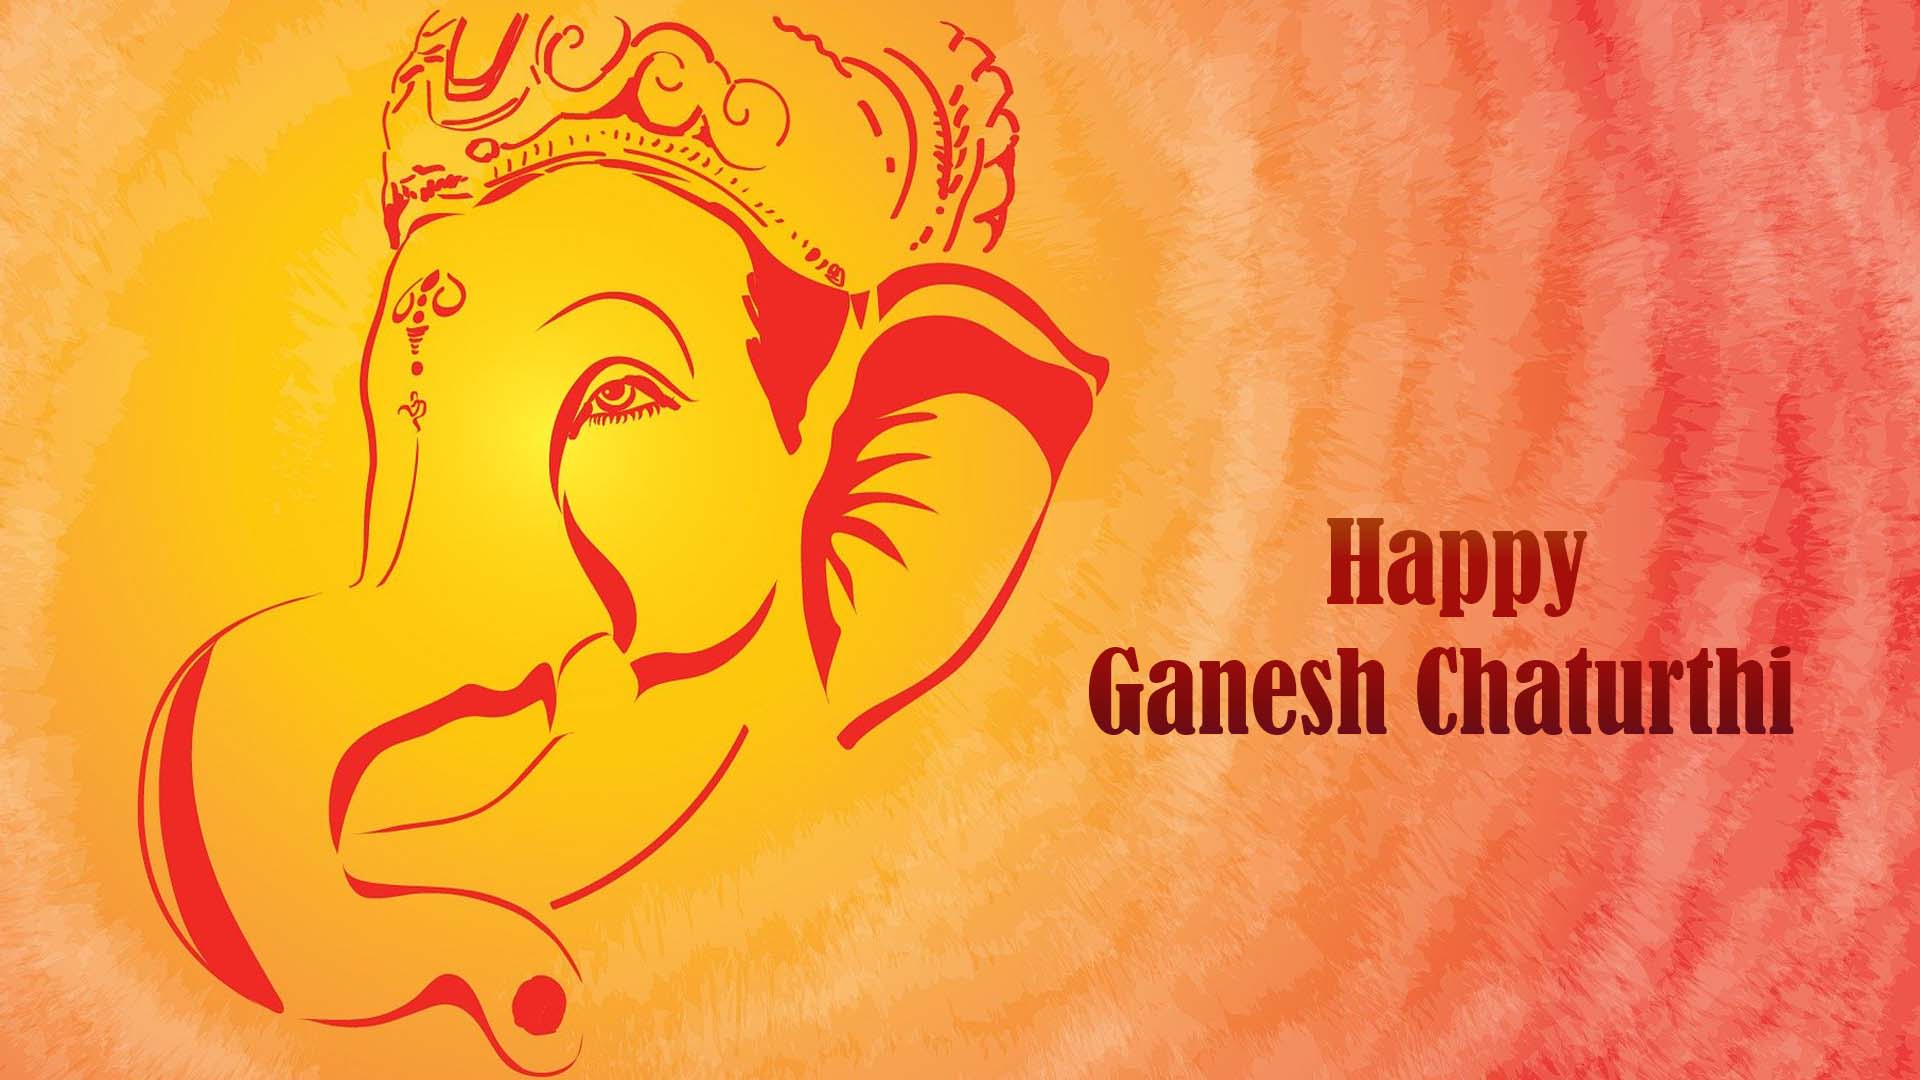 Happy Ganesh Chaturthi 2022 Images, Wishes, Quotes and Messages